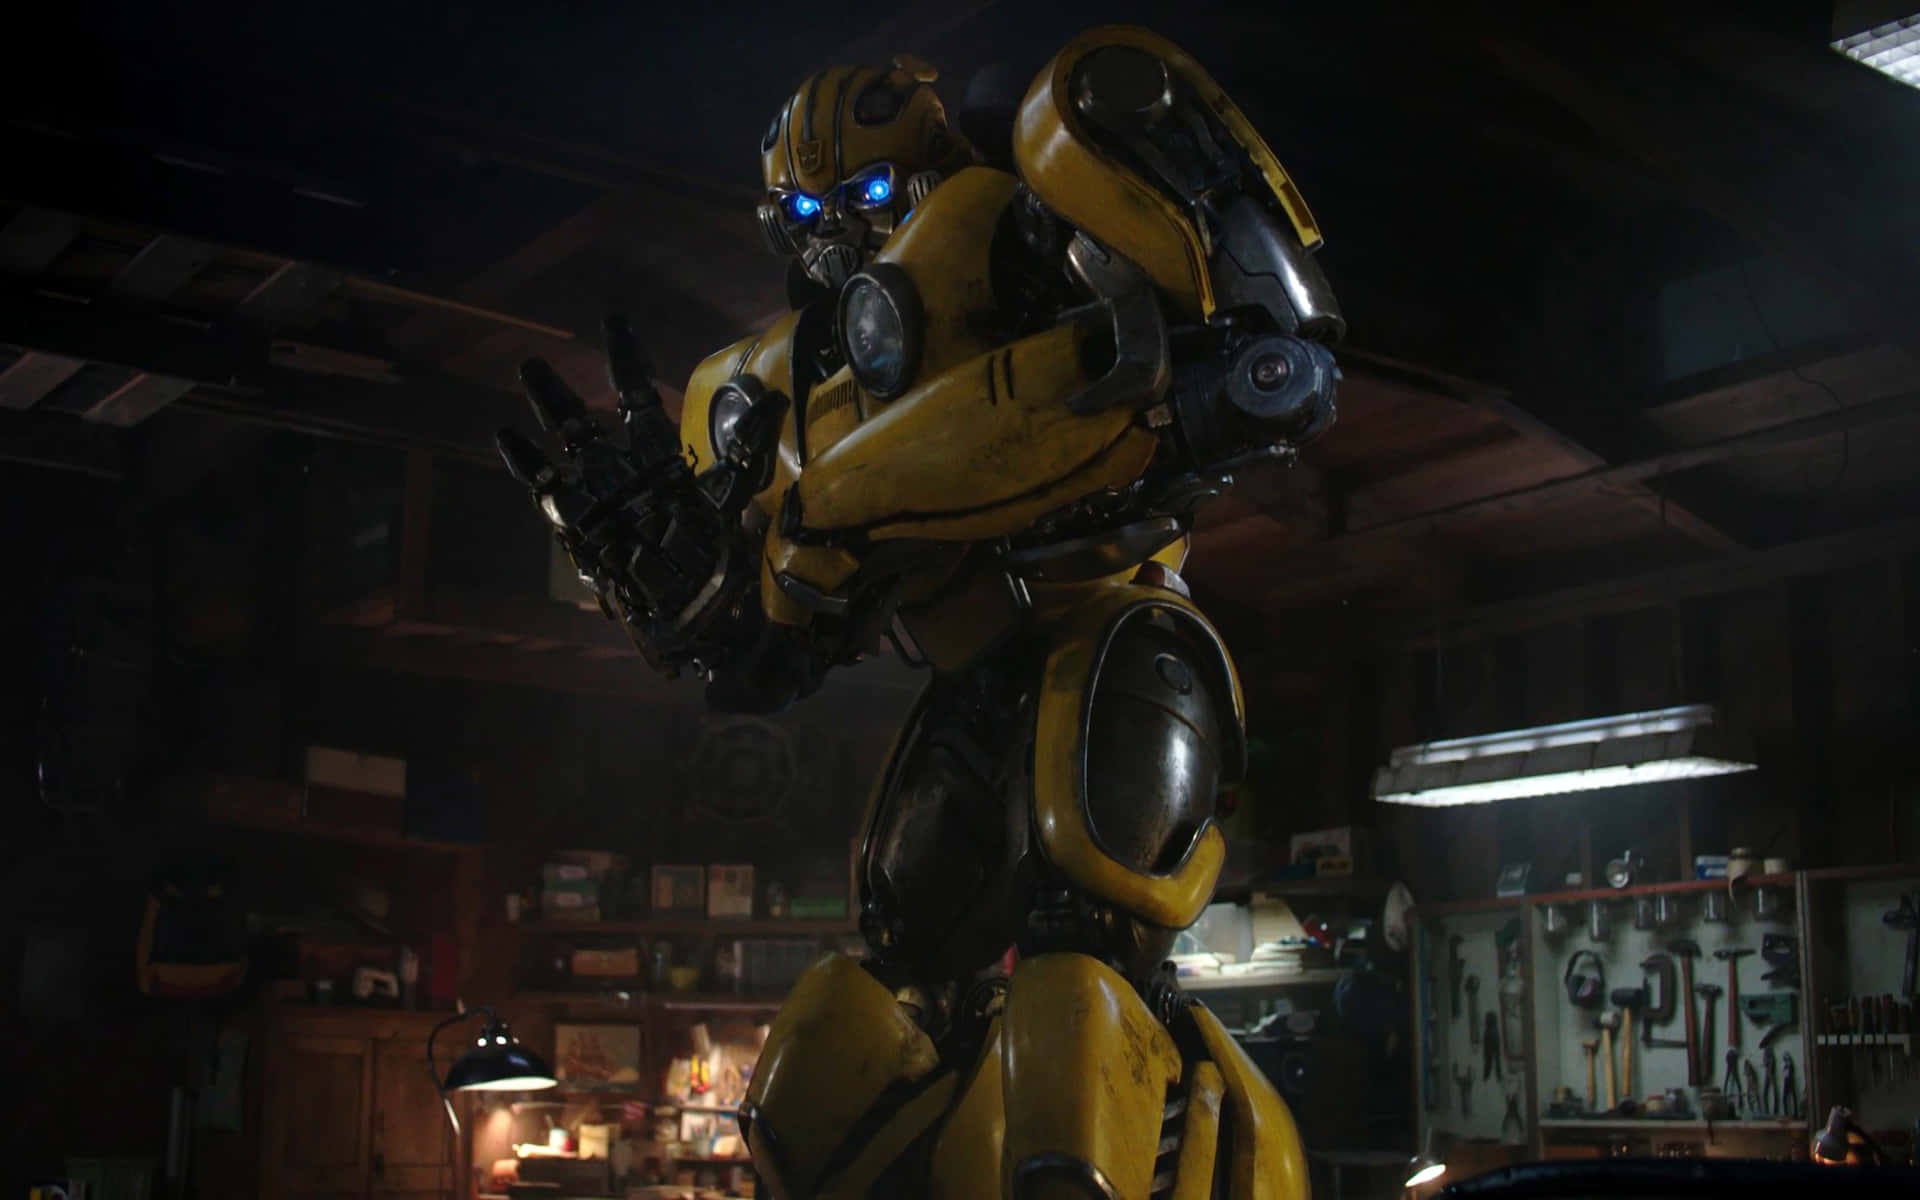 Transformers Bumblebee Posing In A Room Background